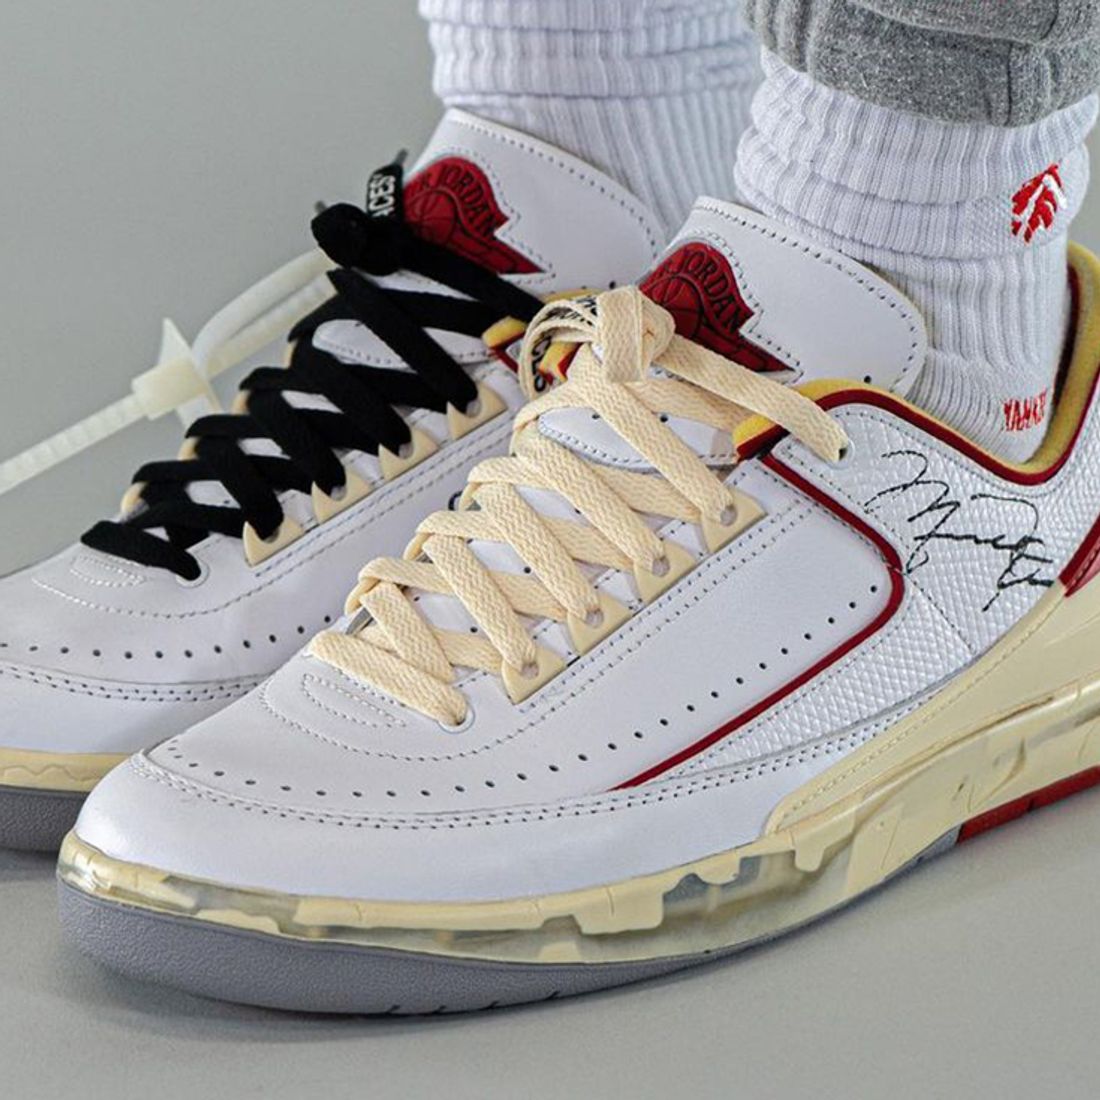 Air Jordan 2 signed Off White are coming